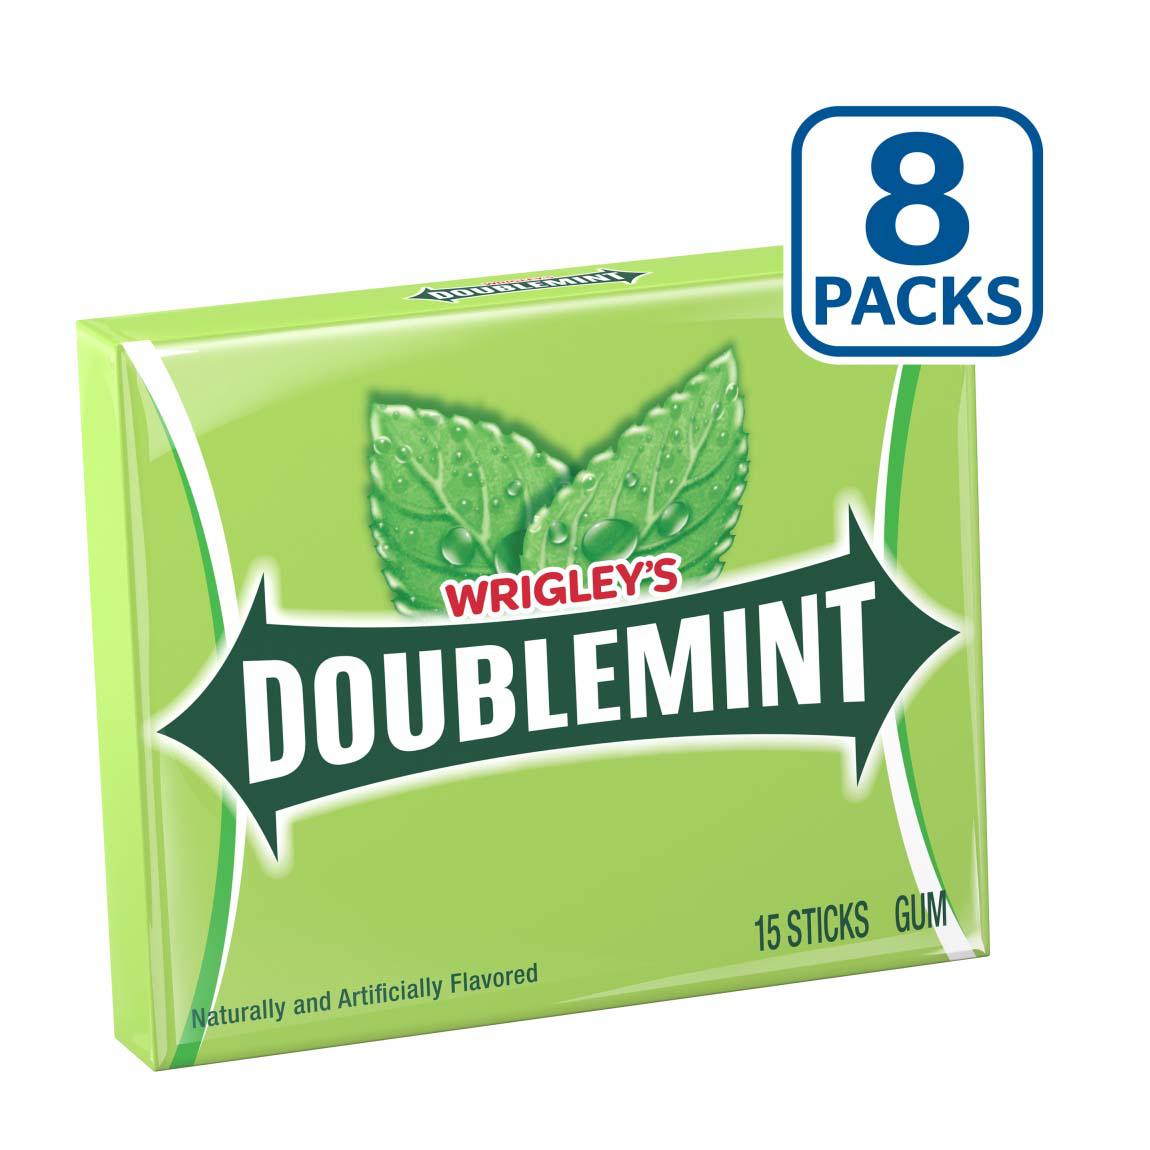 Wrigley's Doublemint Chewing Gum Value Pack, 8 Pk; image 5 of 6